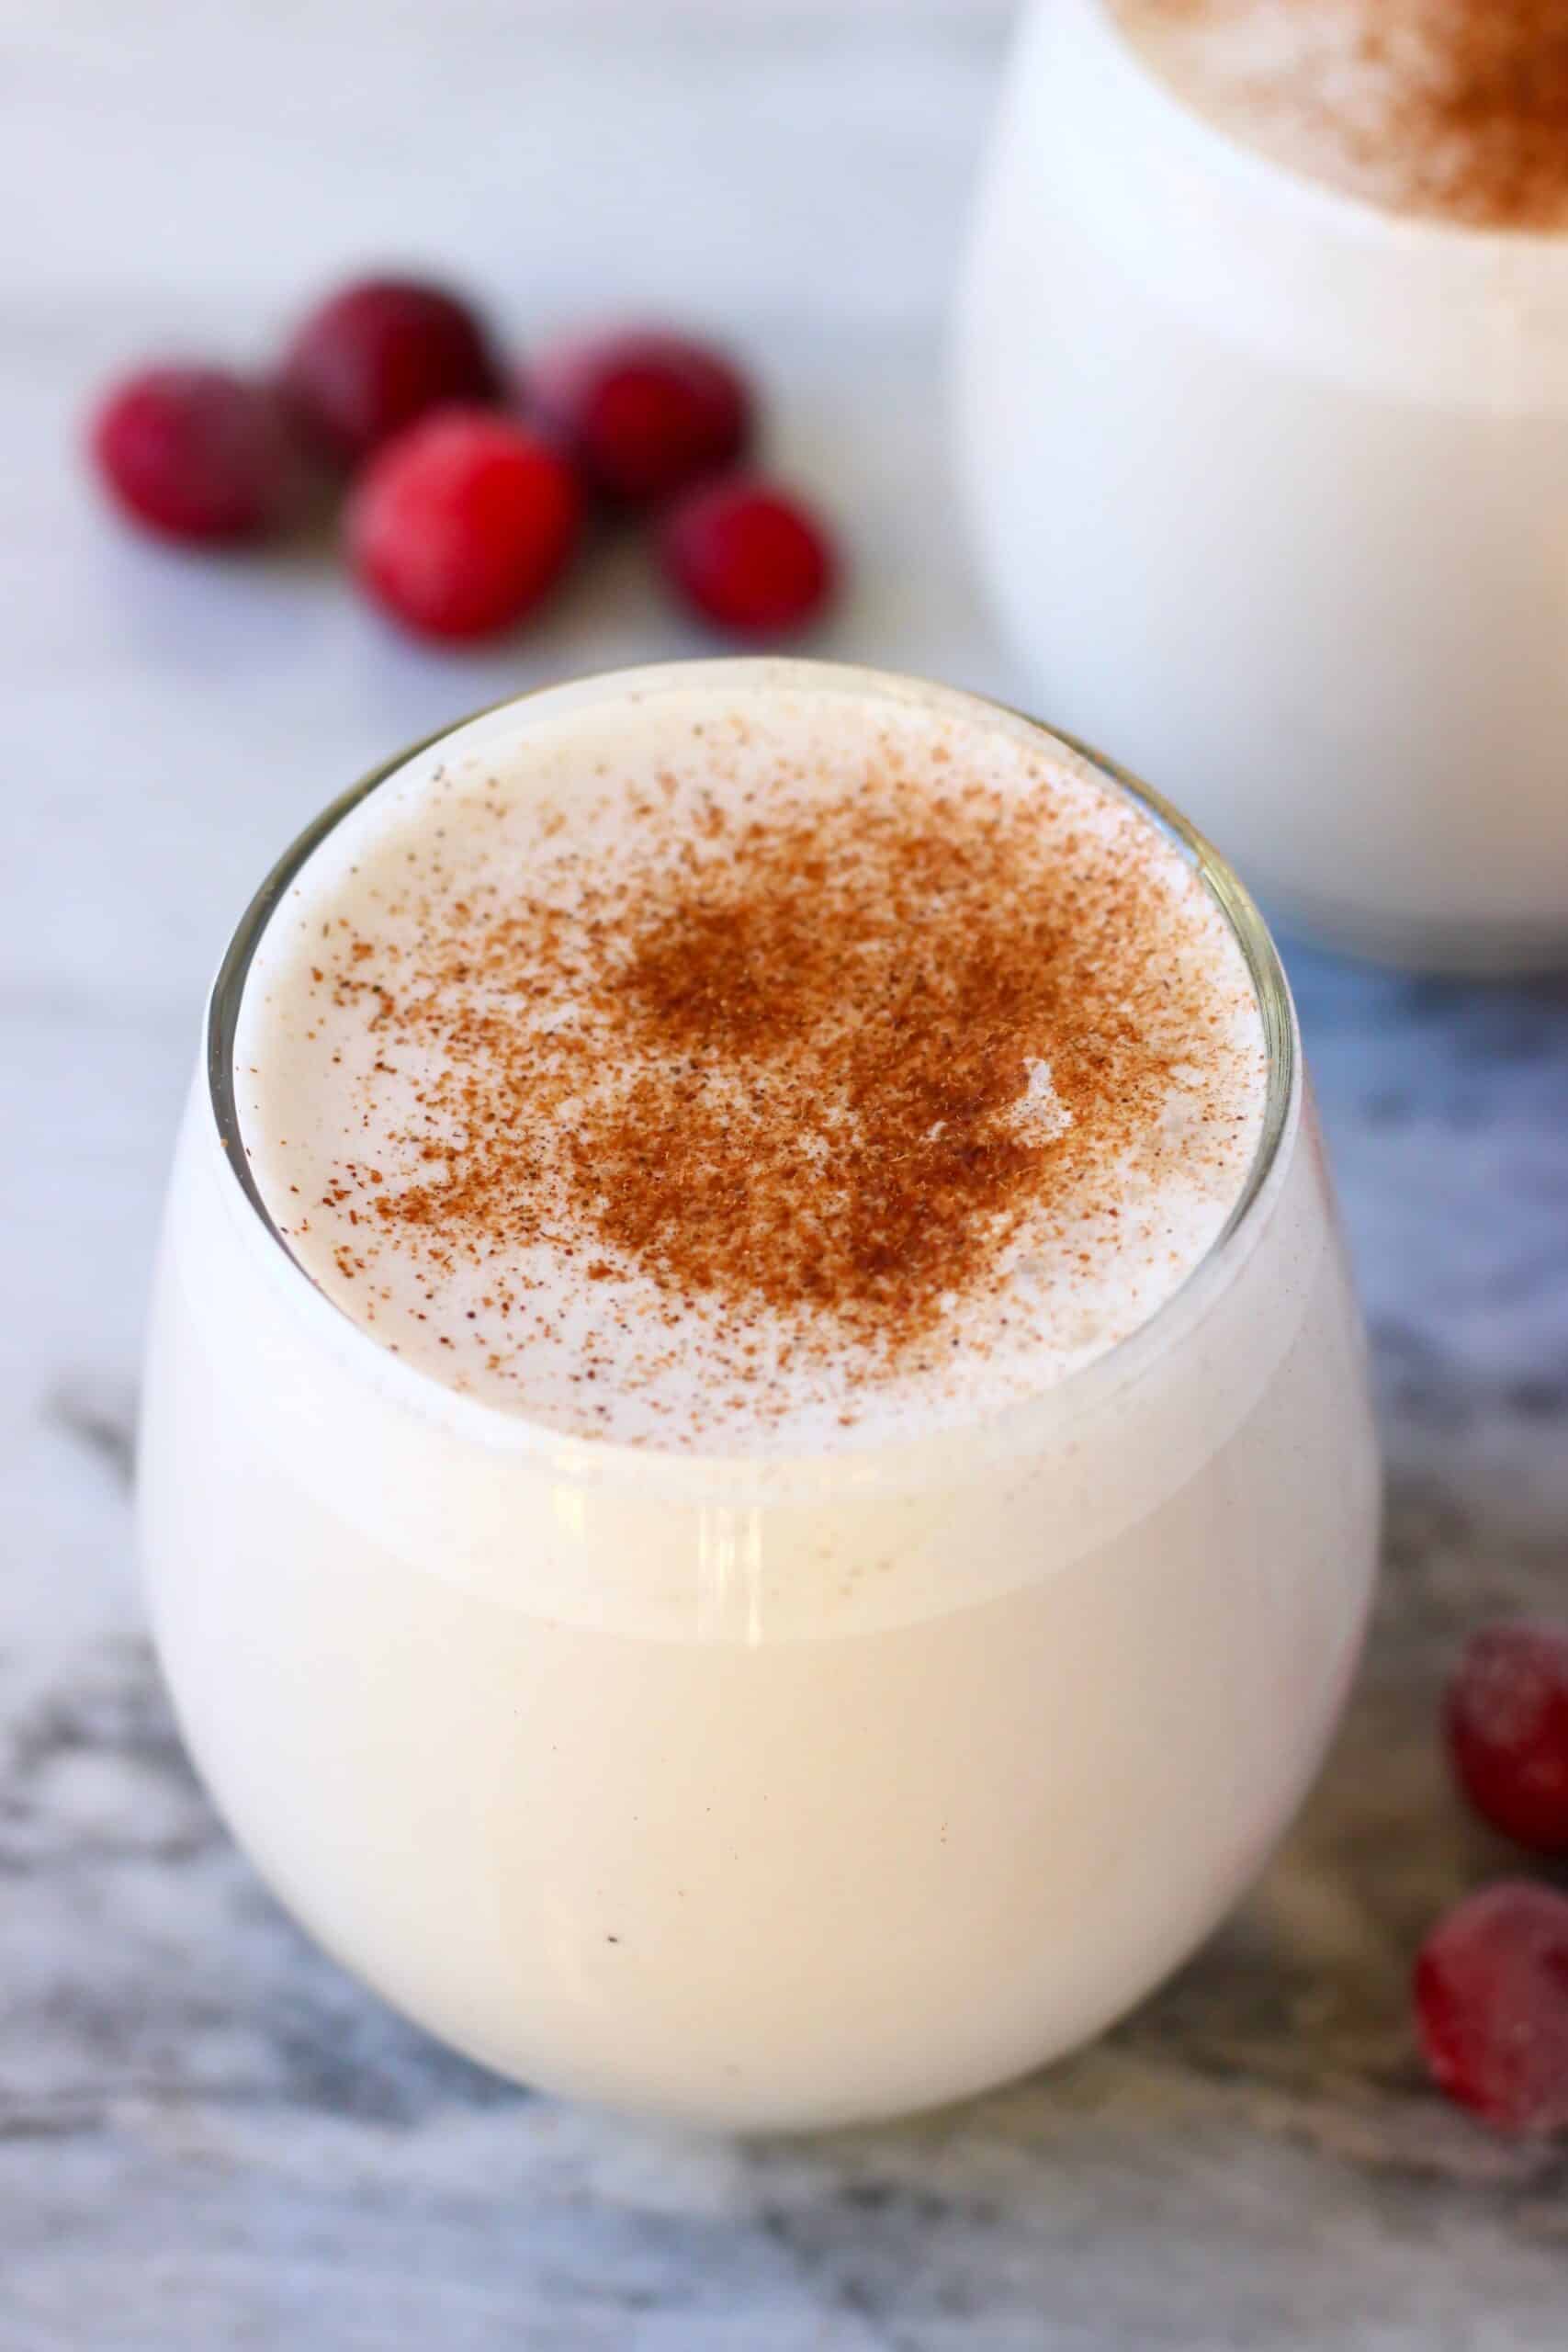 Vegan eggnog in a glass topped with cinnamon against a marble background